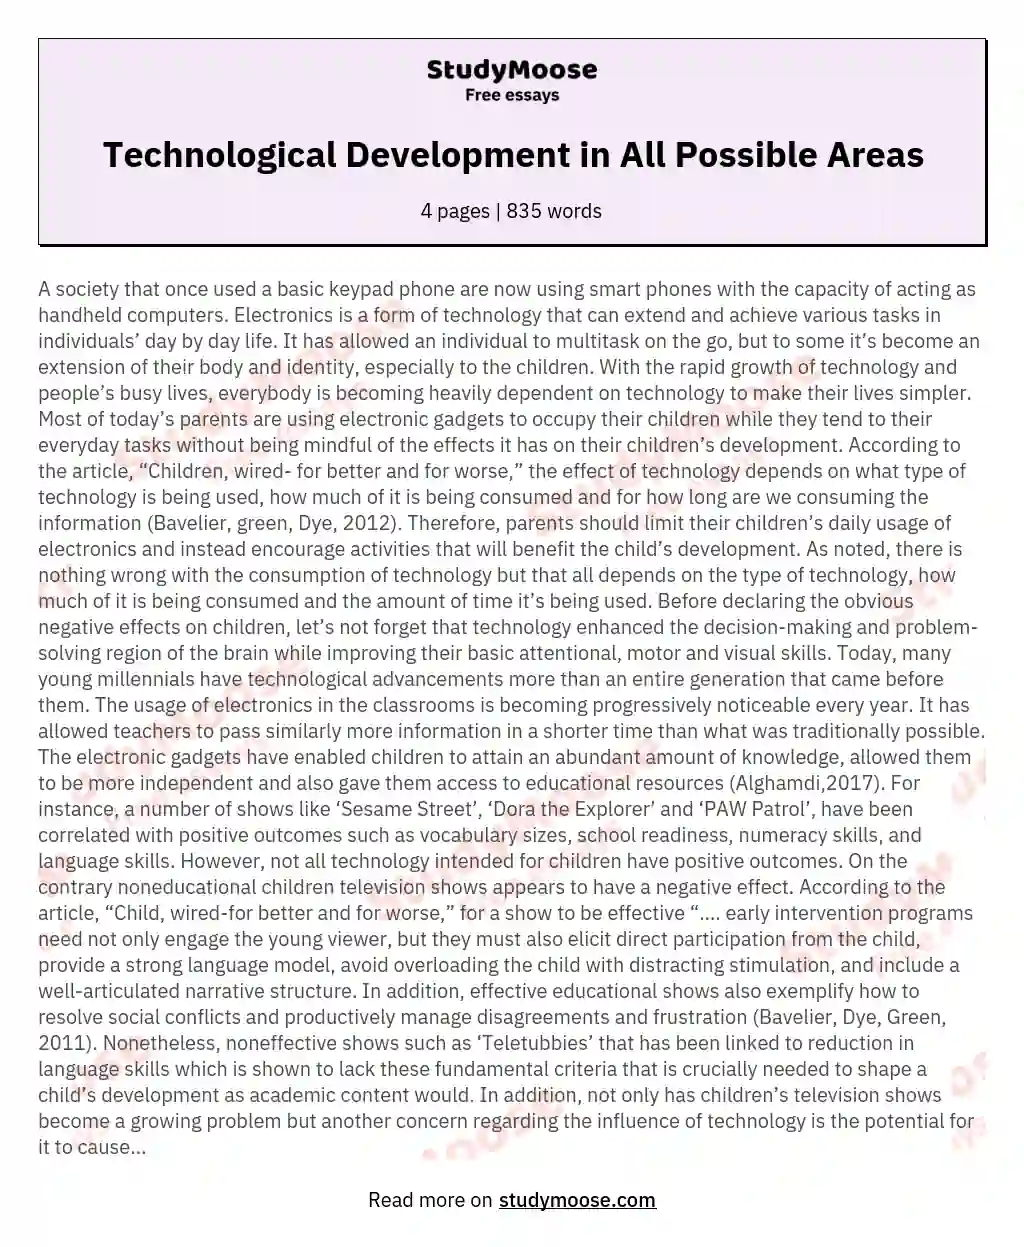 Technological Development in All Possible Areas